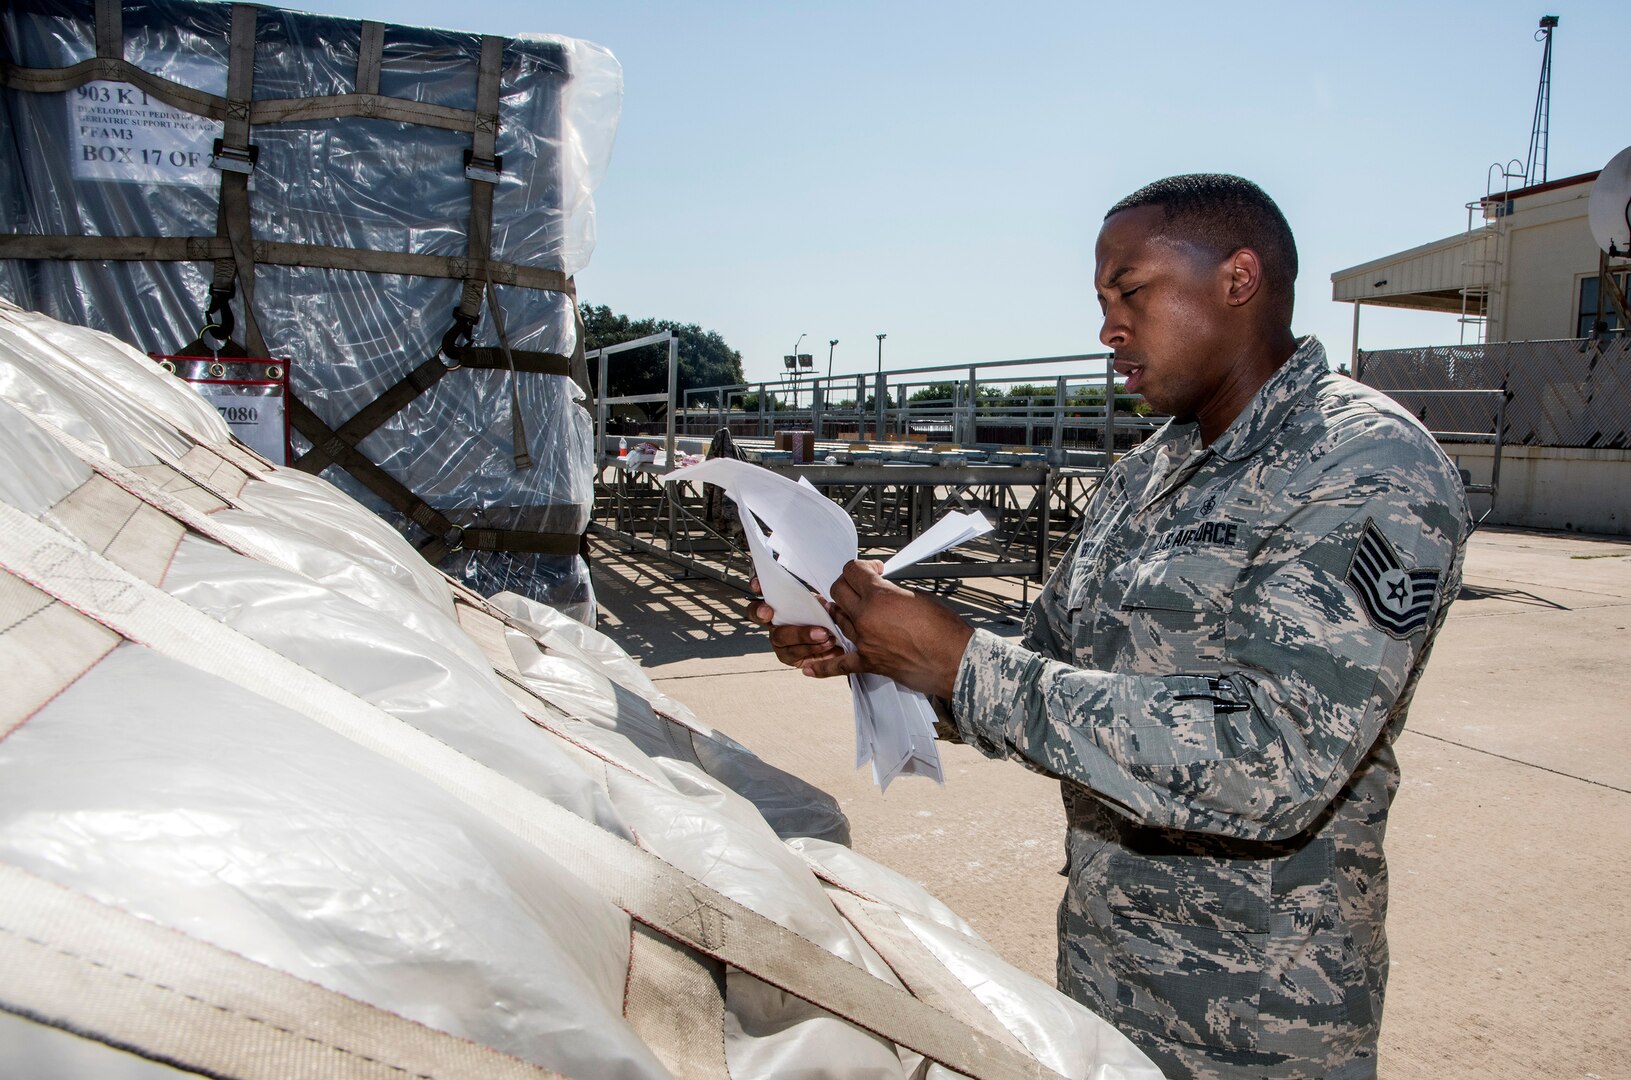 Tech. Sgt. Lloyd Brock, Air Force Medical Operations Agency, matches paperwork to pallets loaded with medical supplies and equipment Aug. 30, 2017, at Joint Base San Antonio-Lackland, Texas.